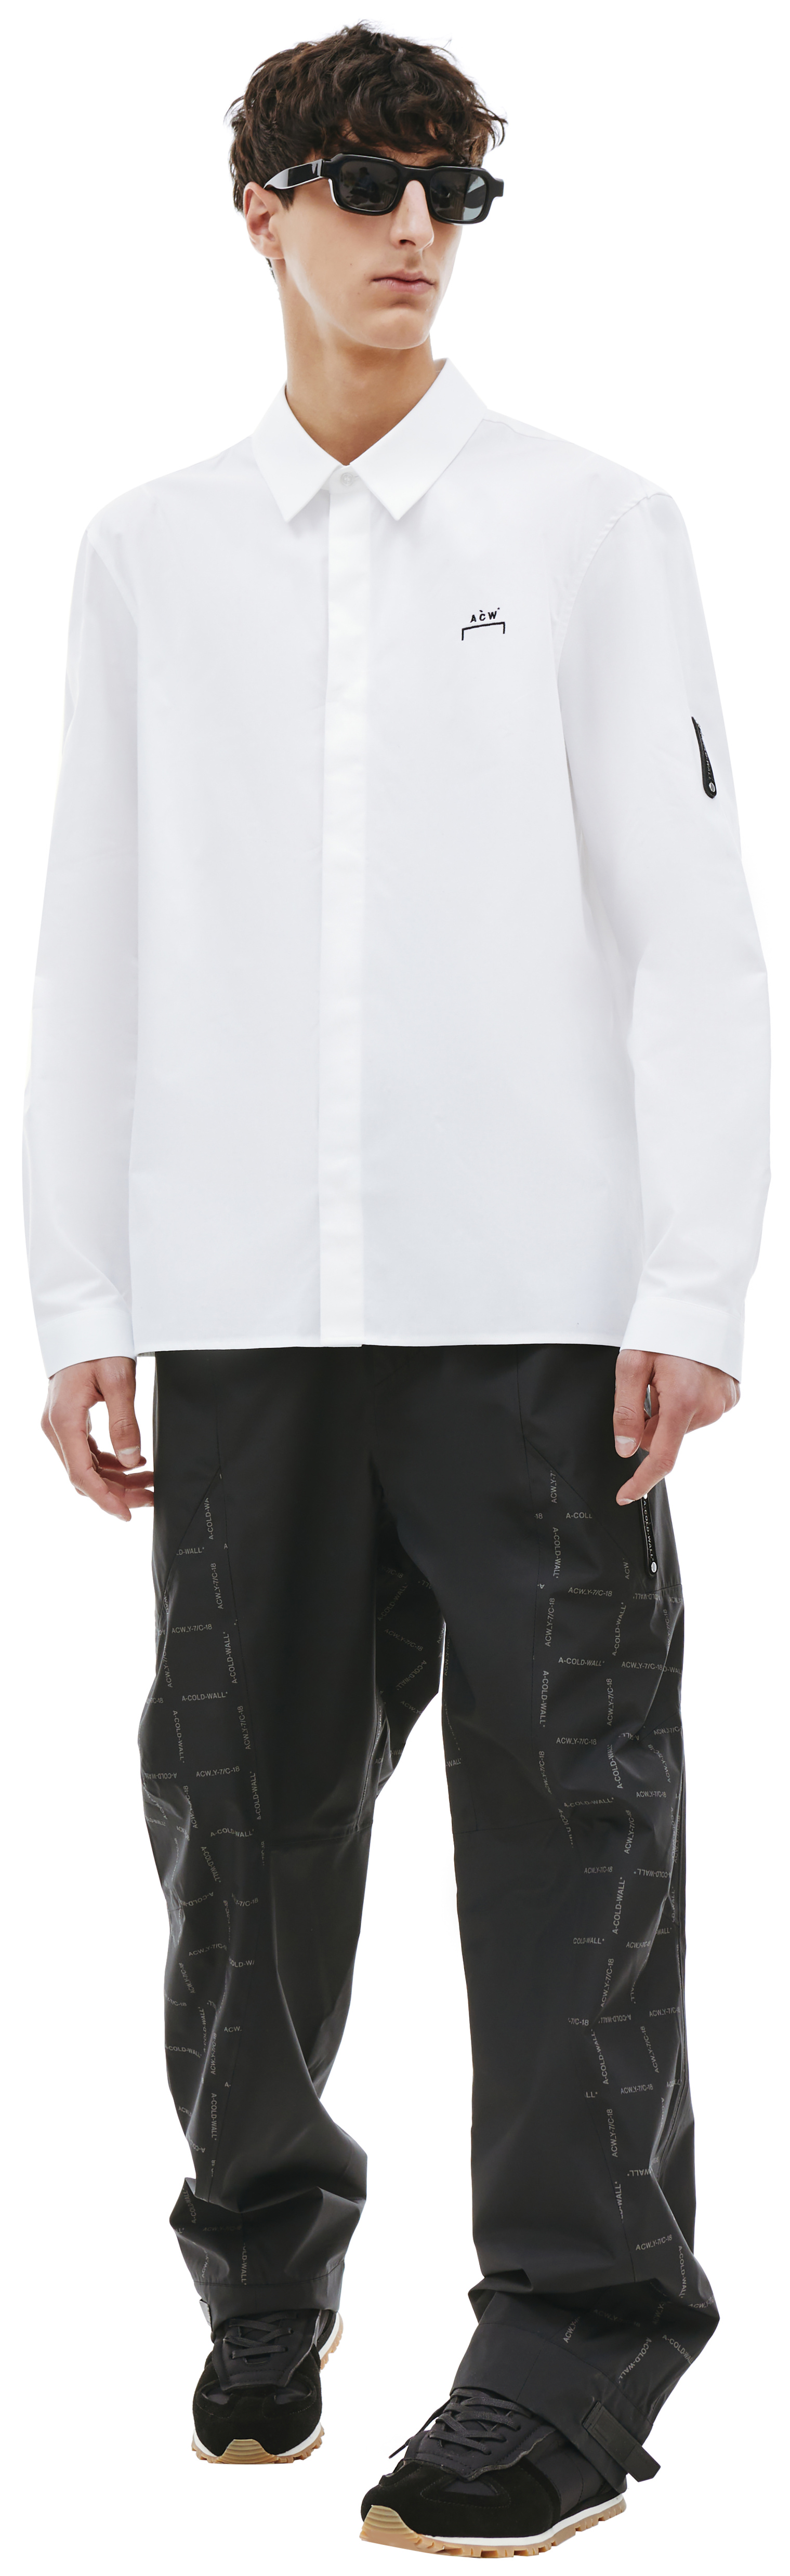 A-COLD-WALL* Cotton Embroidered Shirt